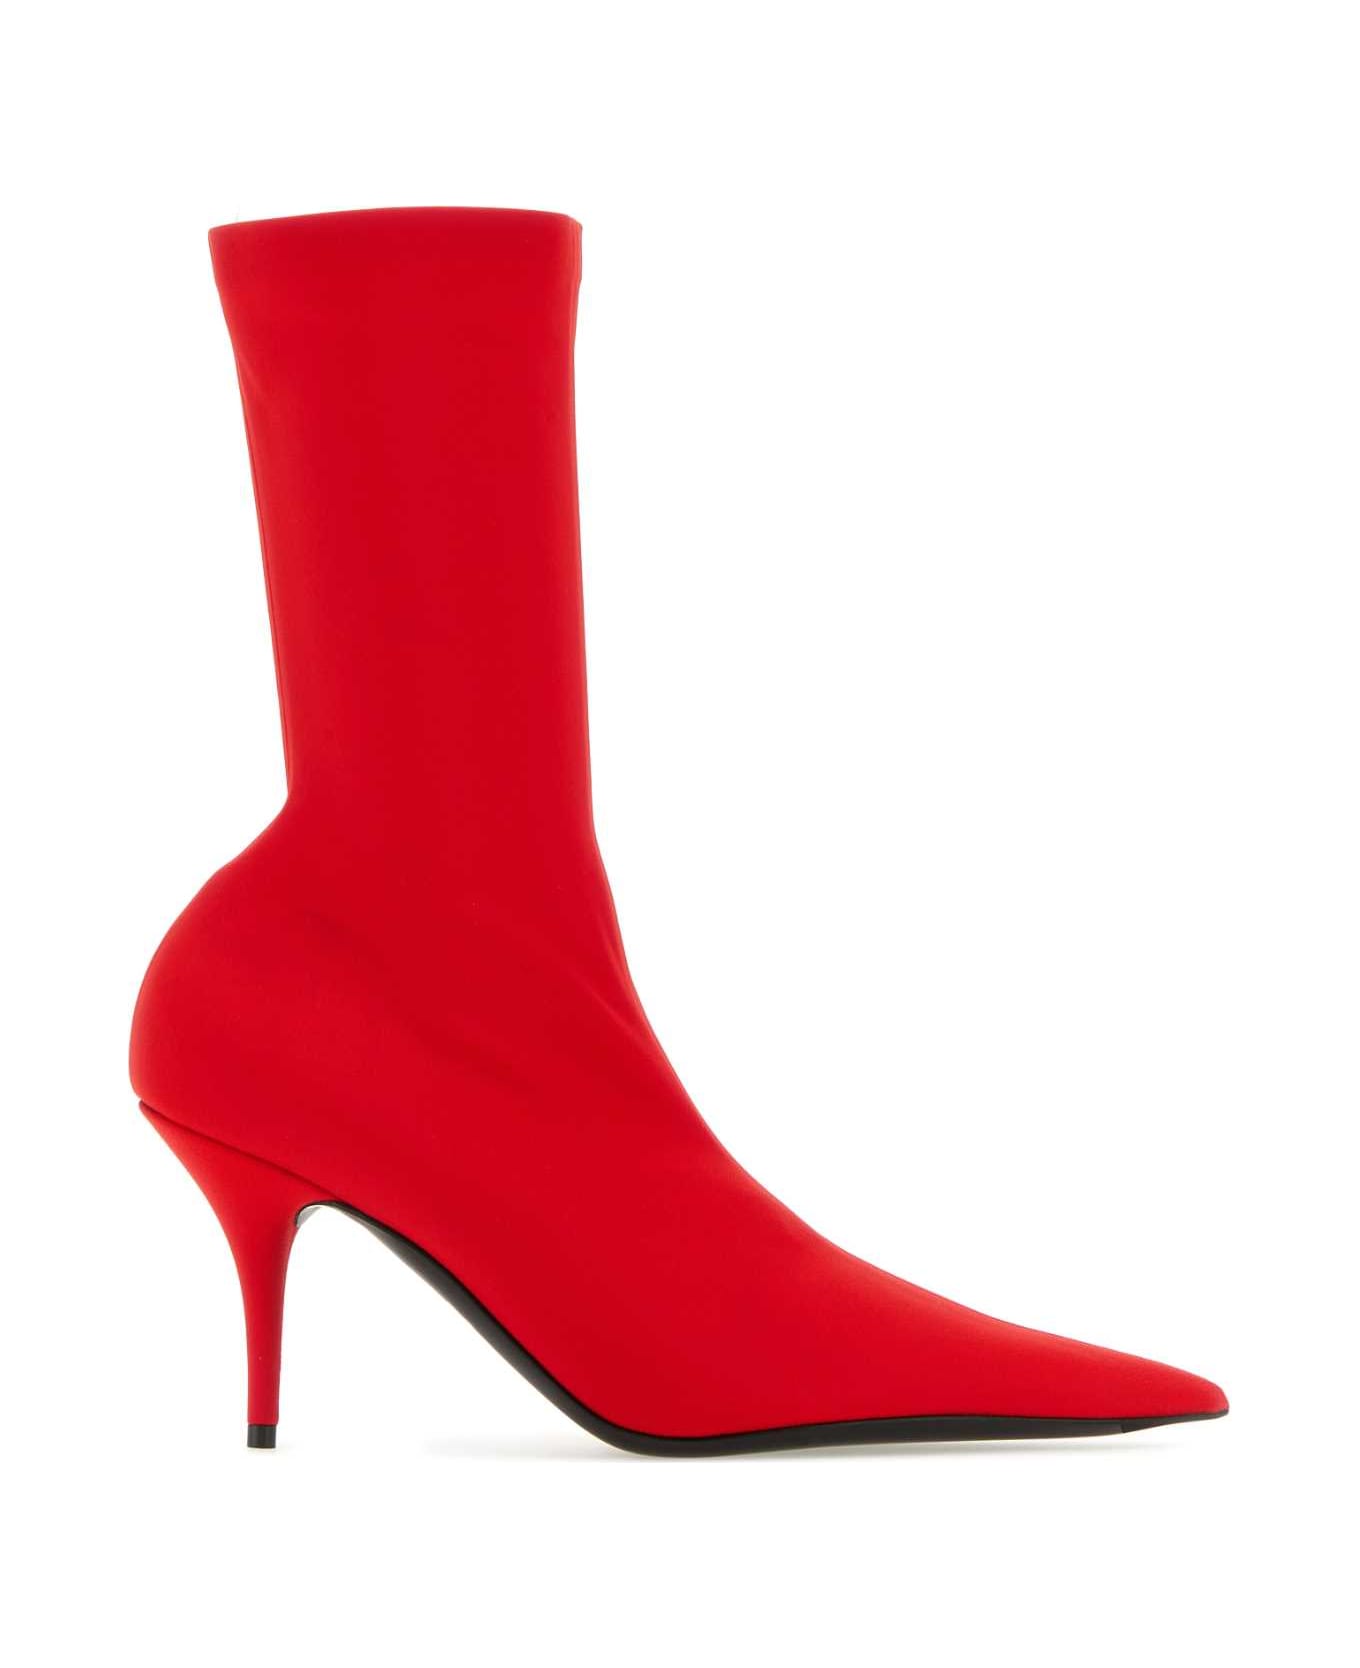 Balenciaga Red Fabric Knife Ankle Boots - 6090 ブーツ